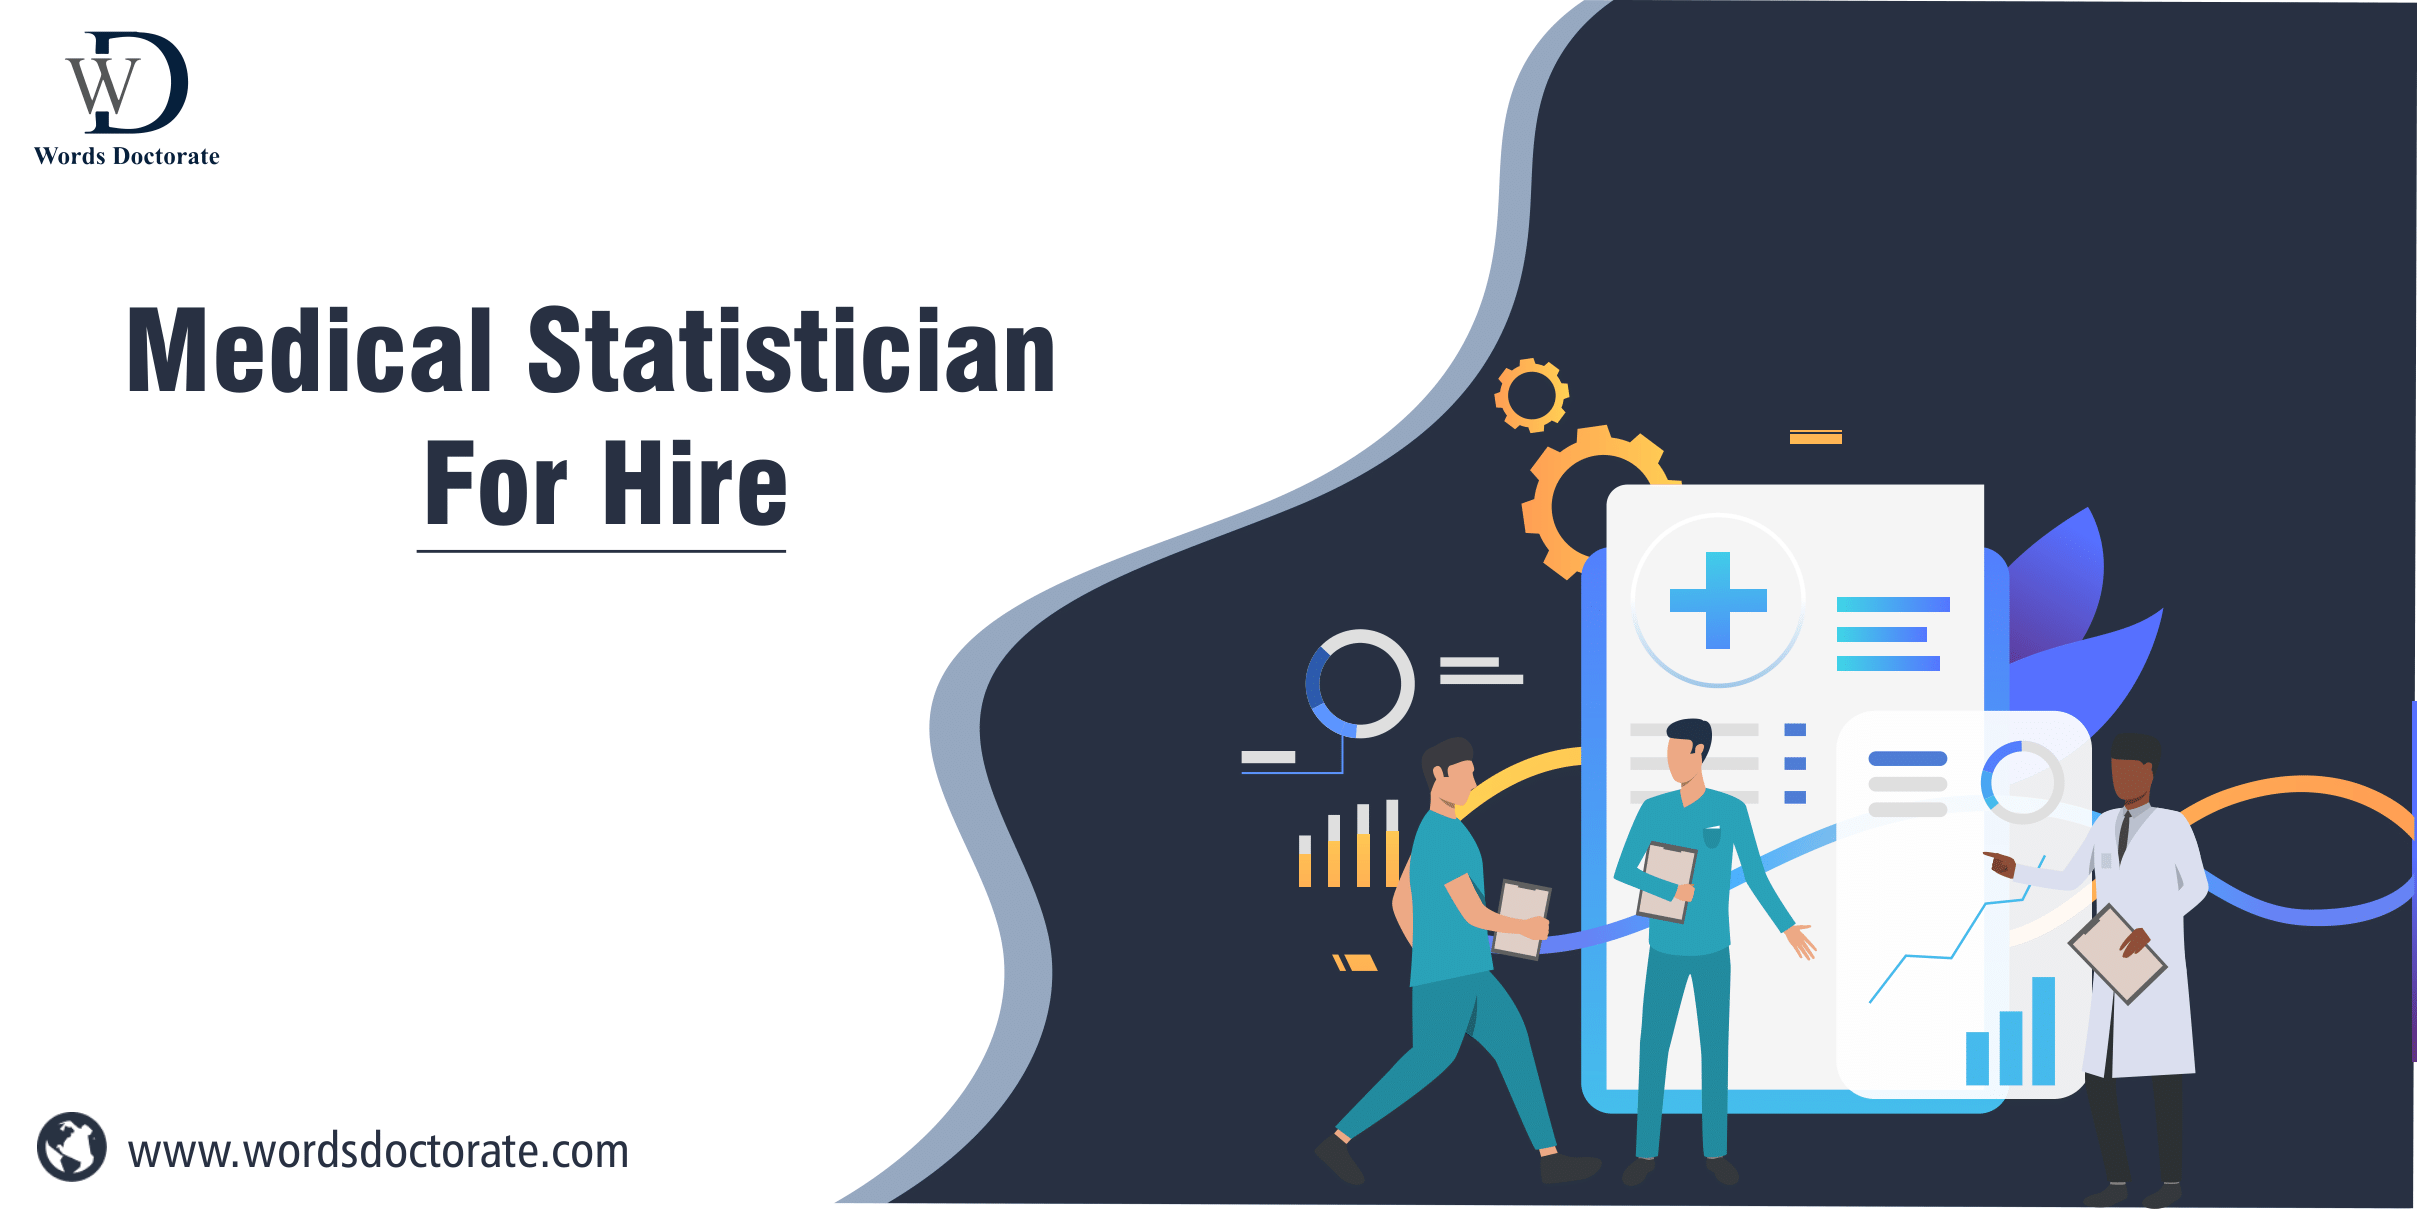 Medical Statistician For Hire